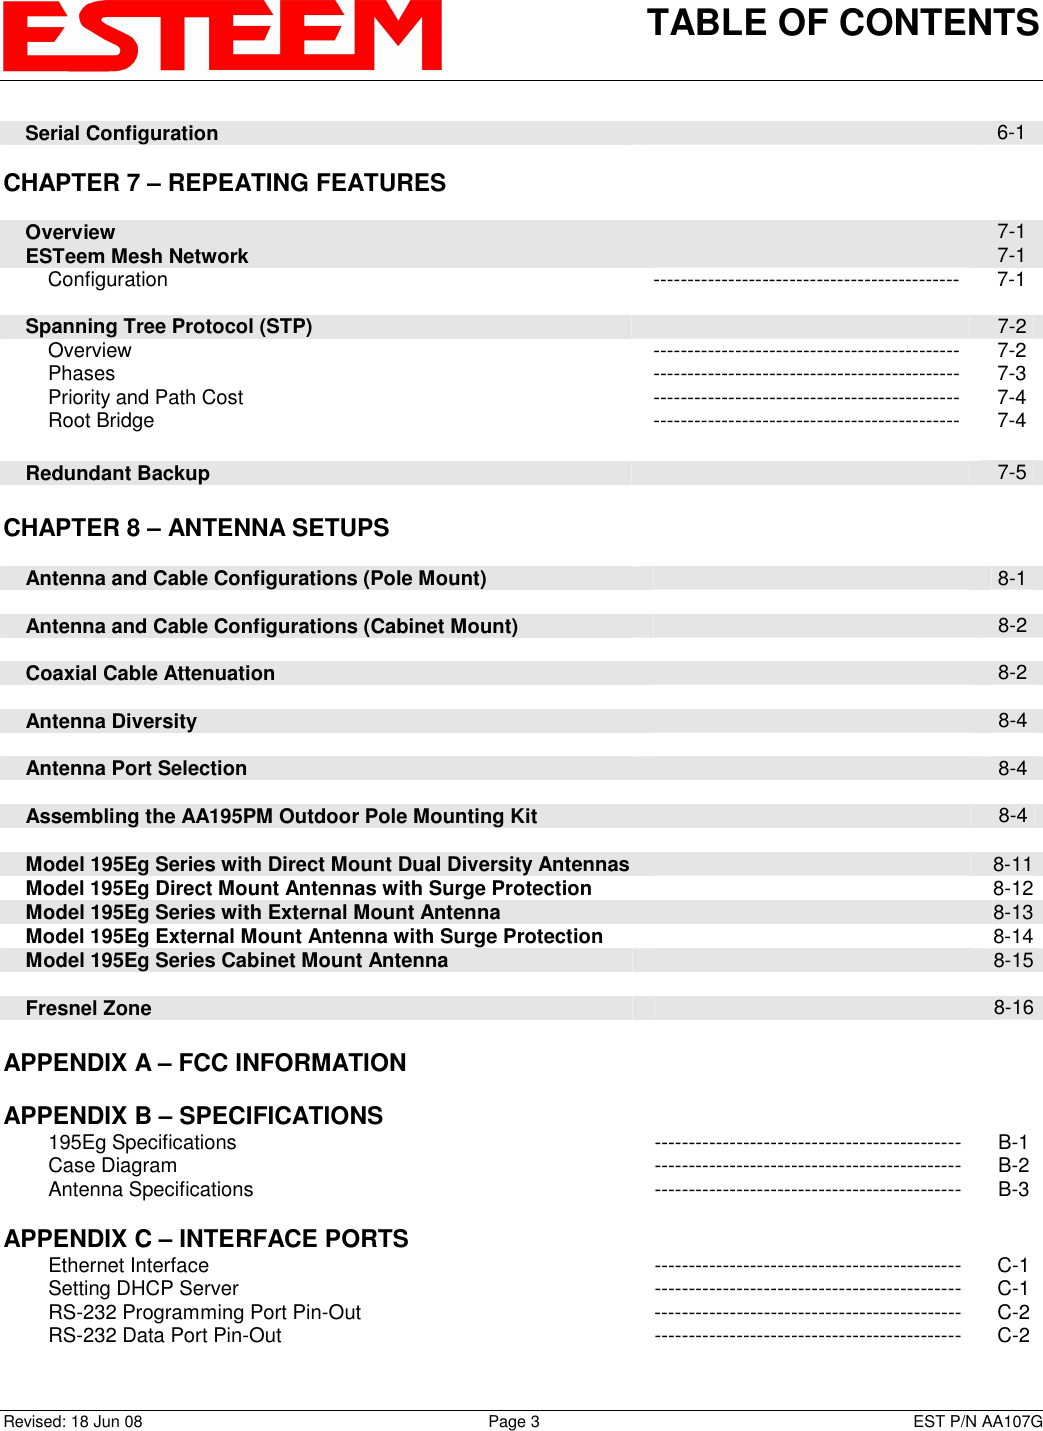 TABLE OF CONTENTS    Revised: 18 Jun 08  Page 3  EST P/N AA107G     Serial Configuration   6-1      CHAPTER 7 – REPEATING FEATURES             Overview   7-1     ESTeem Mesh Network   7-1         Configuration  ---------------------------------------------  7-1          Spanning Tree Protocol (STP)   7-2         Overview  ---------------------------------------------  7-2         Phases  ---------------------------------------------  7-3         Priority and Path Cost  ---------------------------------------------  7-4         Root Bridge  ---------------------------------------------  7-4         Redundant Backup   7-5     CHAPTER 8 – ANTENNA SETUPS            Antenna and Cable Configurations (Pole Mount)   8-1          Antenna and Cable Configurations (Cabinet Mount)   8-2          Coaxial Cable Attenuation   8-2         Antenna Diversity   8-4          Antenna Port Selection   8-4          Assembling the AA195PM Outdoor Pole Mounting Kit   8-4         Model 195Eg Series with Direct Mount Dual Diversity Antennas   8-11     Model 195Eg Direct Mount Antennas with Surge Protection   8-12     Model 195Eg Series with External Mount Antenna   8-13     Model 195Eg External Mount Antenna with Surge Protection    8-14     Model 195Eg Series Cabinet Mount Antenna   8-15        Fresnel Zone    8-16    APPENDIX A – FCC INFORMATION       APPENDIX B – SPECIFICATIONS            195Eg Specifications  ---------------------------------------------  B-1         Case Diagram  ---------------------------------------------  B-2         Antenna Specifications  ---------------------------------------------  B-3    APPENDIX C – INTERFACE PORTS            Ethernet Interface  ---------------------------------------------  C-1         Setting DHCP Server  ---------------------------------------------  C-1         RS-232 Programming Port Pin-Out  ---------------------------------------------  C-2         RS-232 Data Port Pin-Out  ---------------------------------------------  C-2    